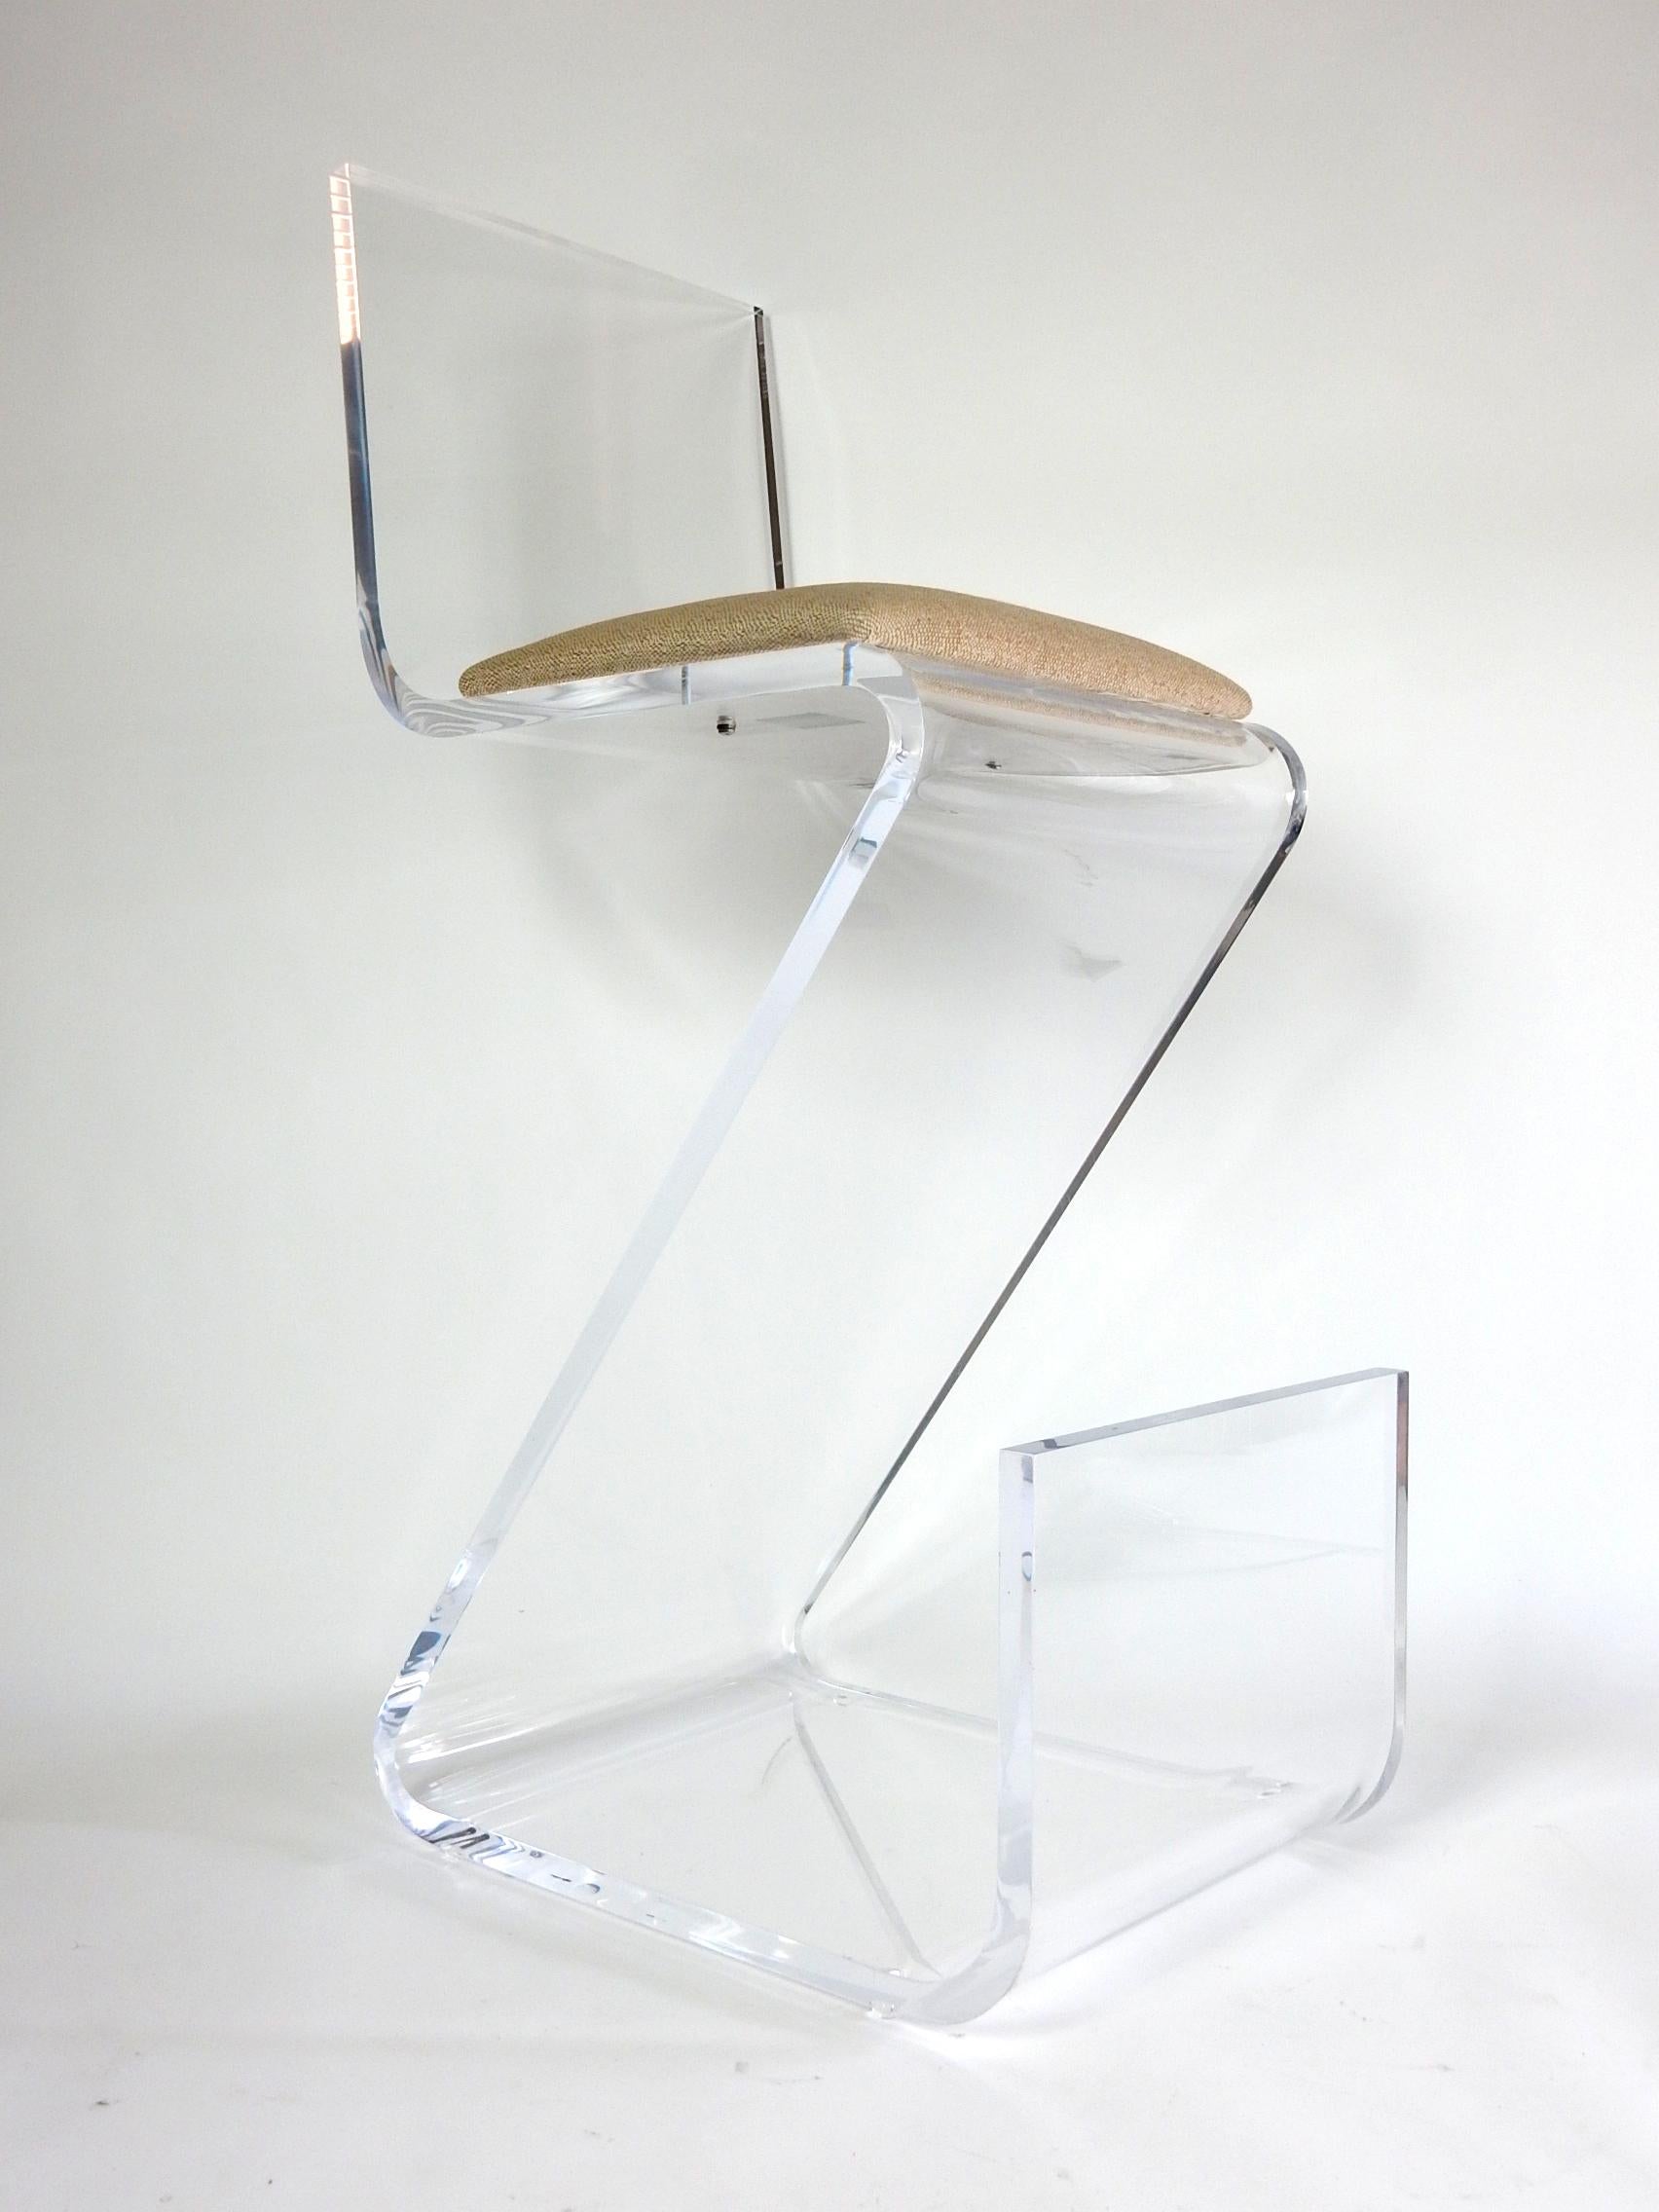 Late 20th Century Signed Artist Shlomi Haziza Lucite Sculpture Z Barstools, 8 Available For Sale